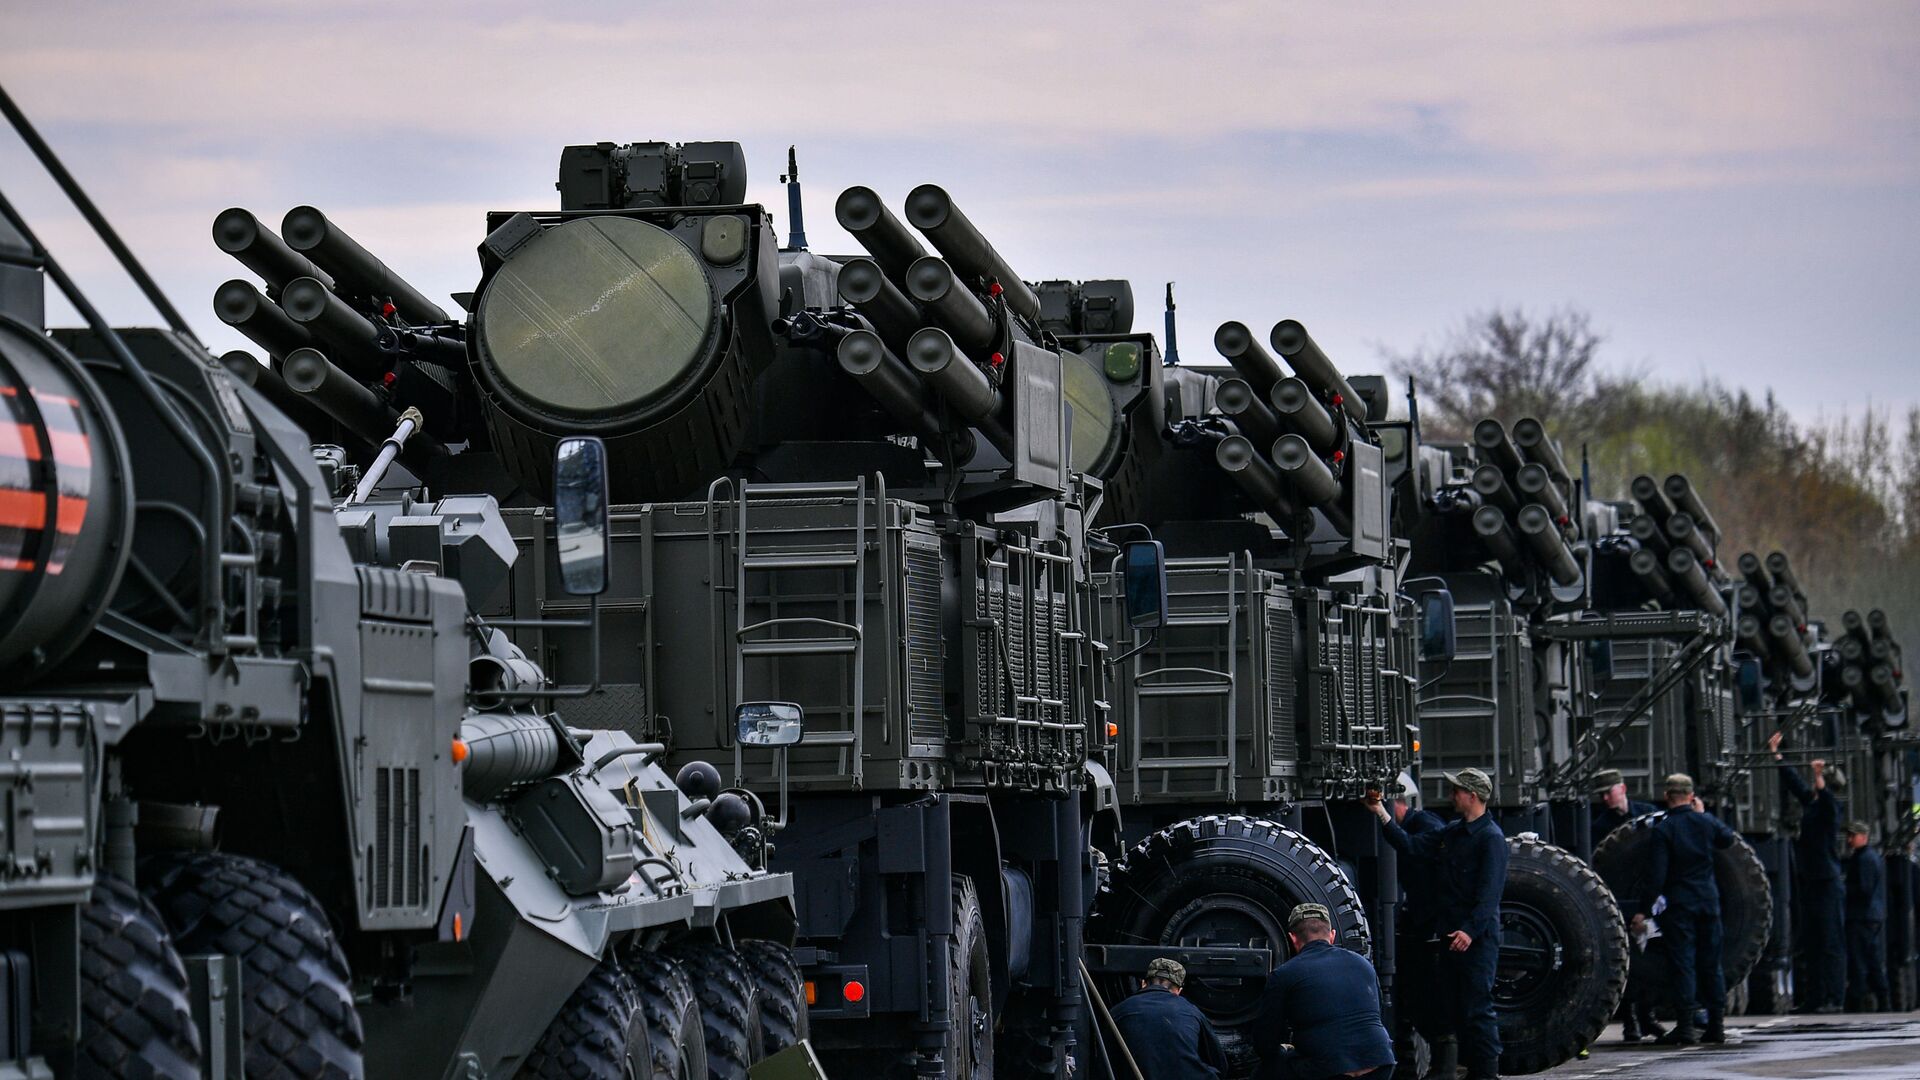 The Pantsir-S mobile self-propelled surface-to-air anti-aircraft system vehicles are parked during its preparation for the upcoming Victory Day Military Parade, in Moscow, Russia. - Sputnik International, 1920, 09.11.2021